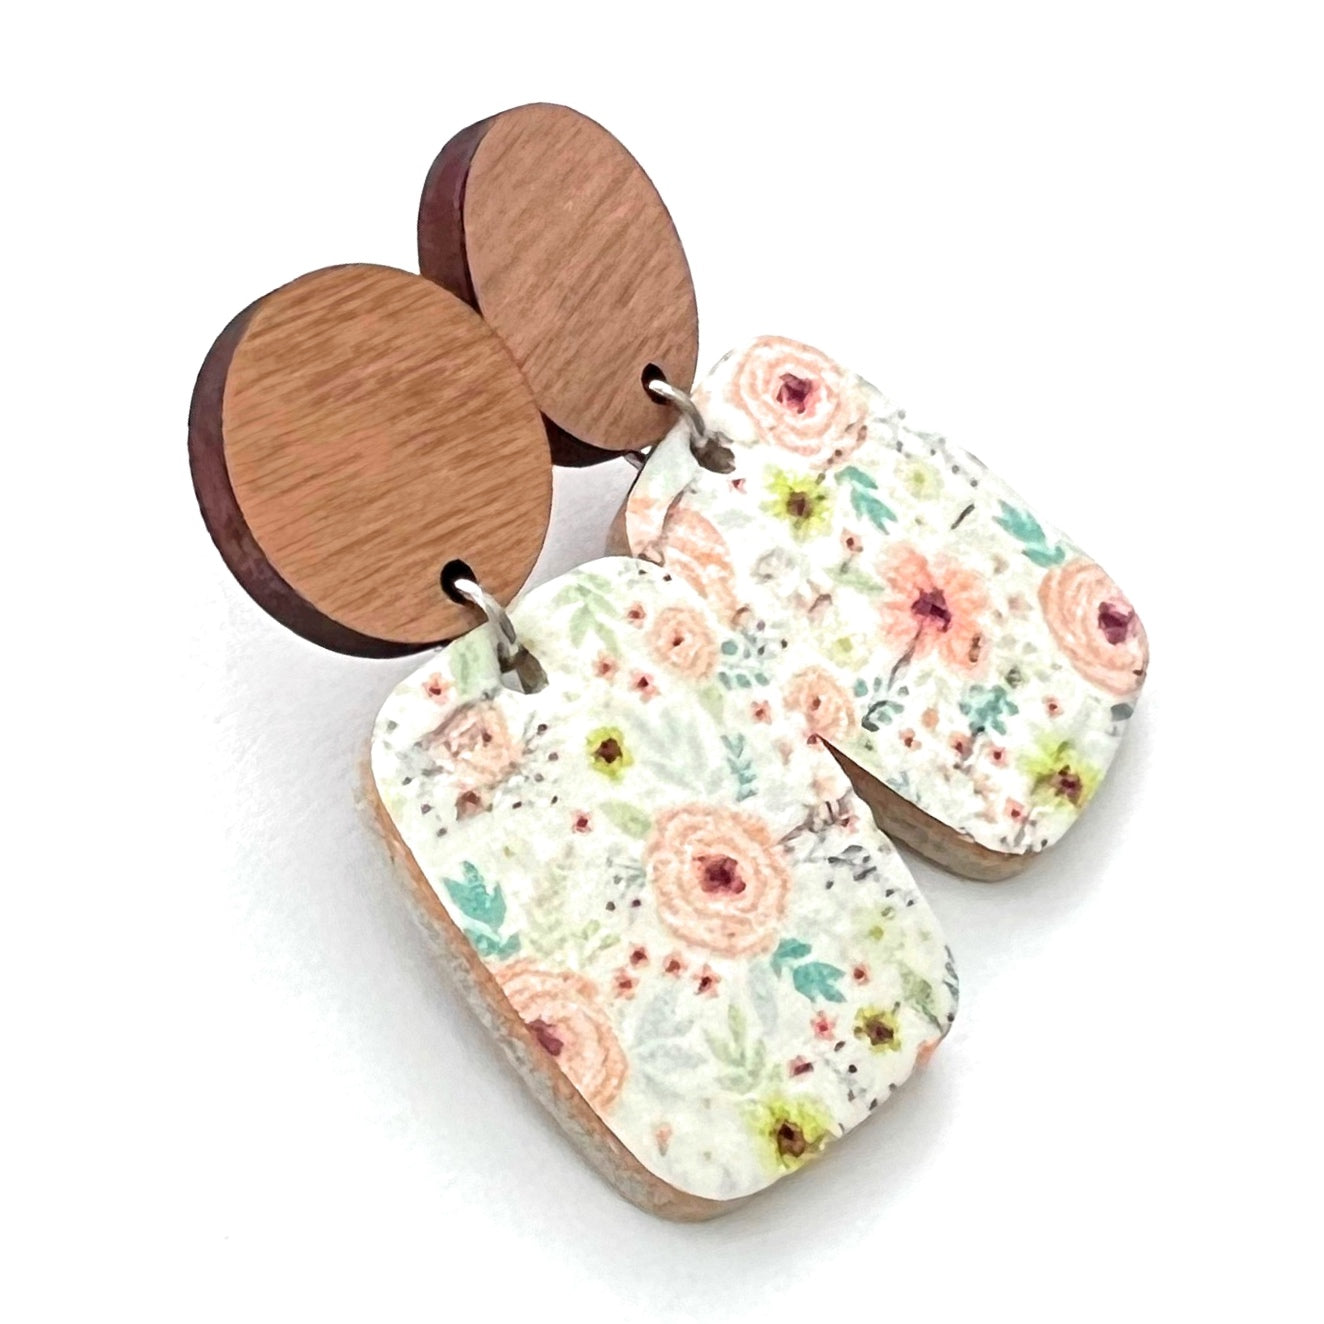 Lightweight Leather and cork Statement earring with wood. Peach blossom floral pattern